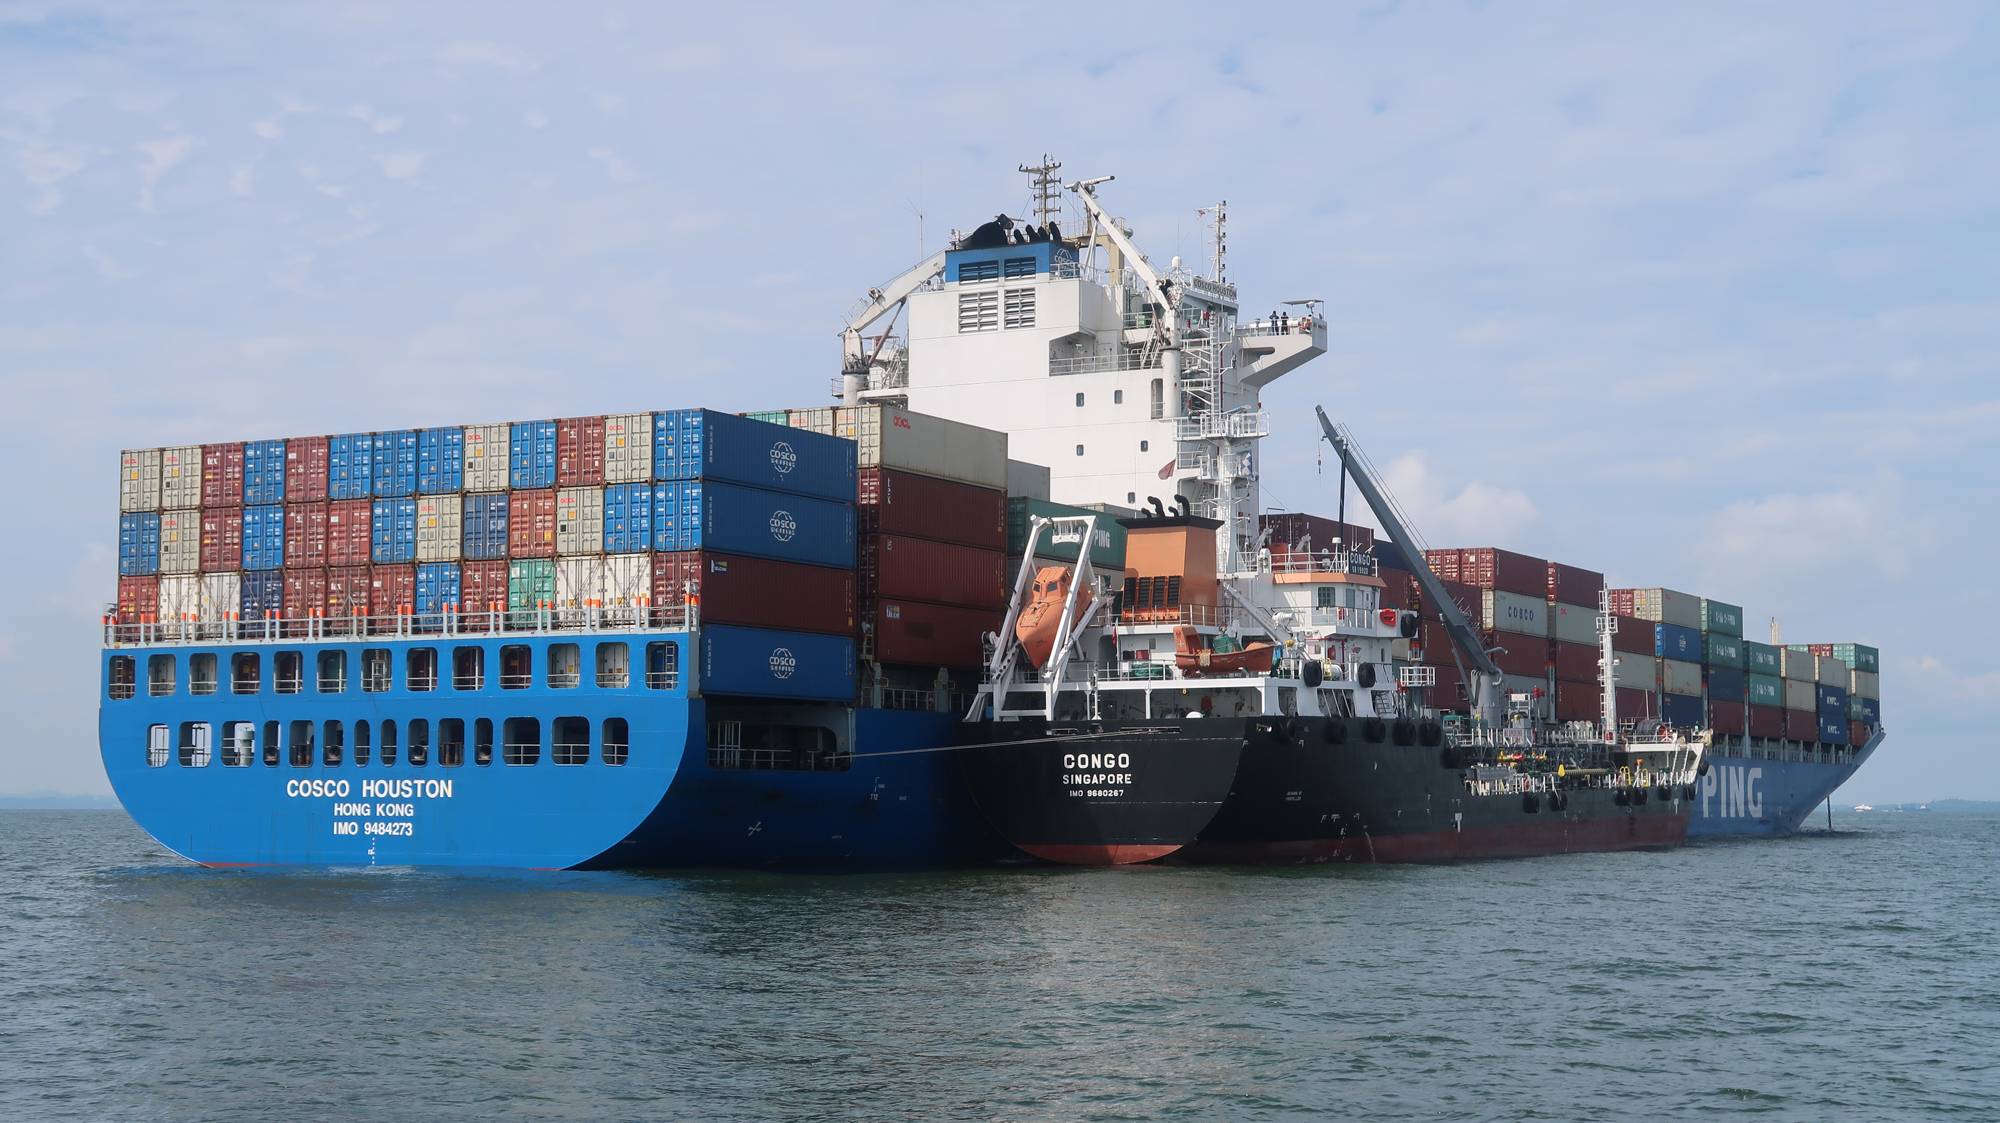 https://www.marinelink.com/news/cosco-shipping-lines-takes-first-499001